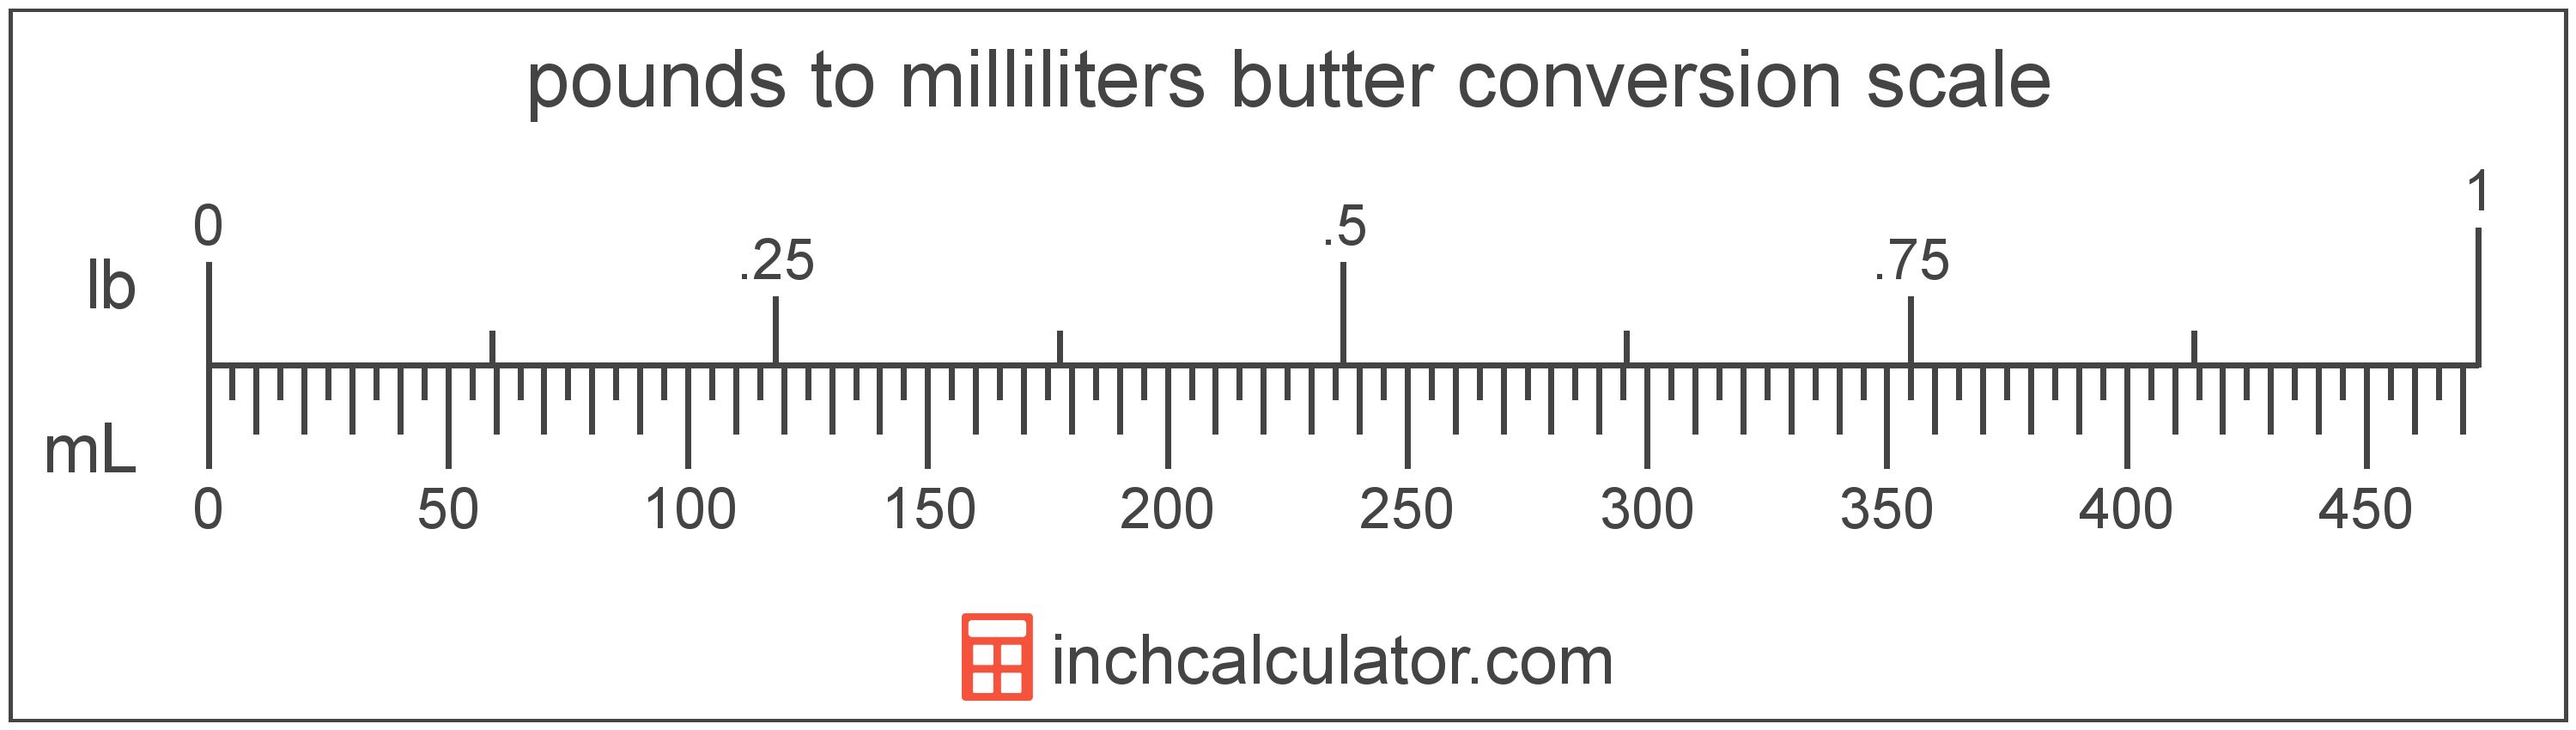 conversion scale showing milliliters and equivalent pounds butter values